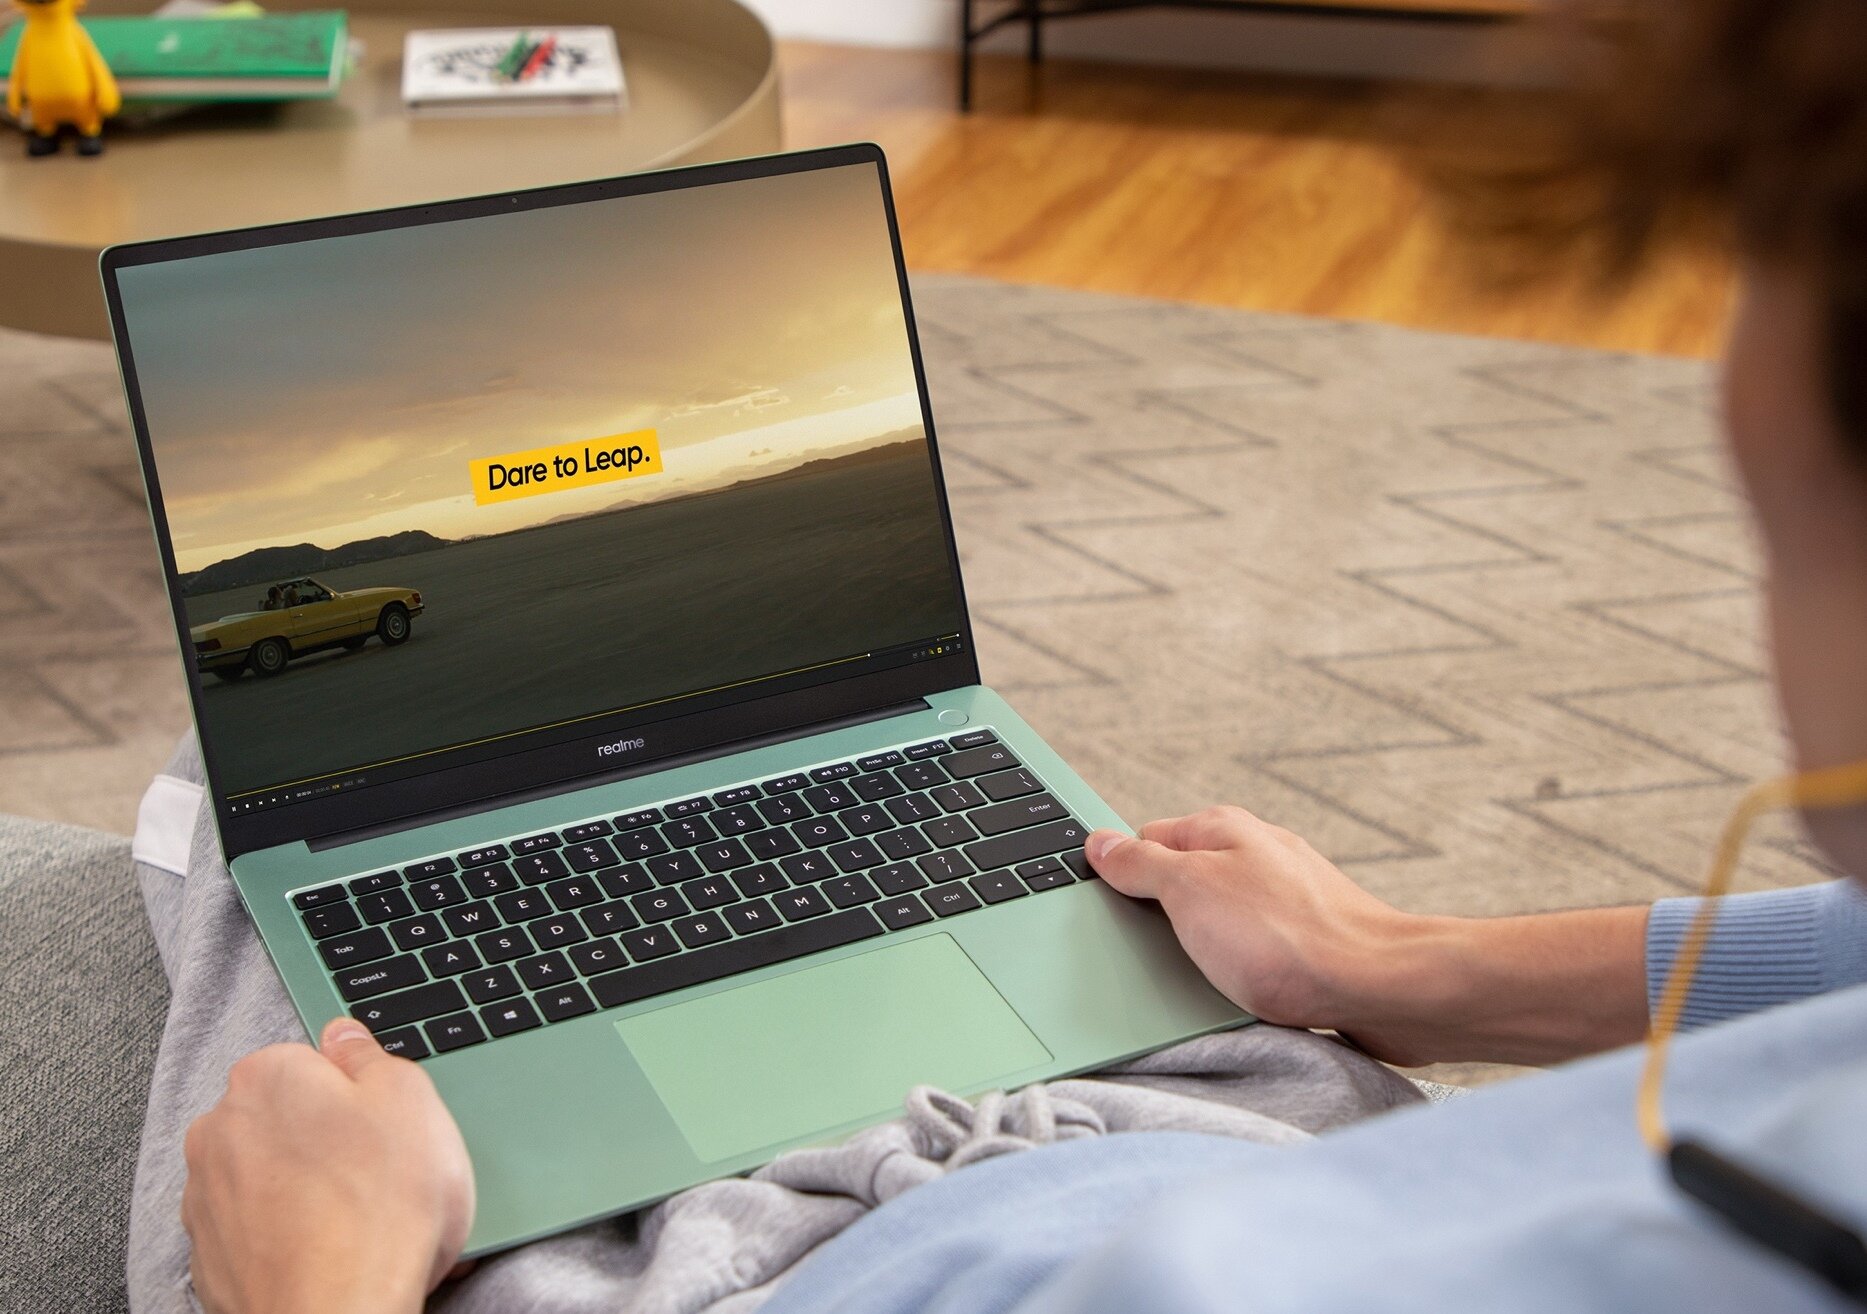 realme is preparing to launch its first laptop in Europe